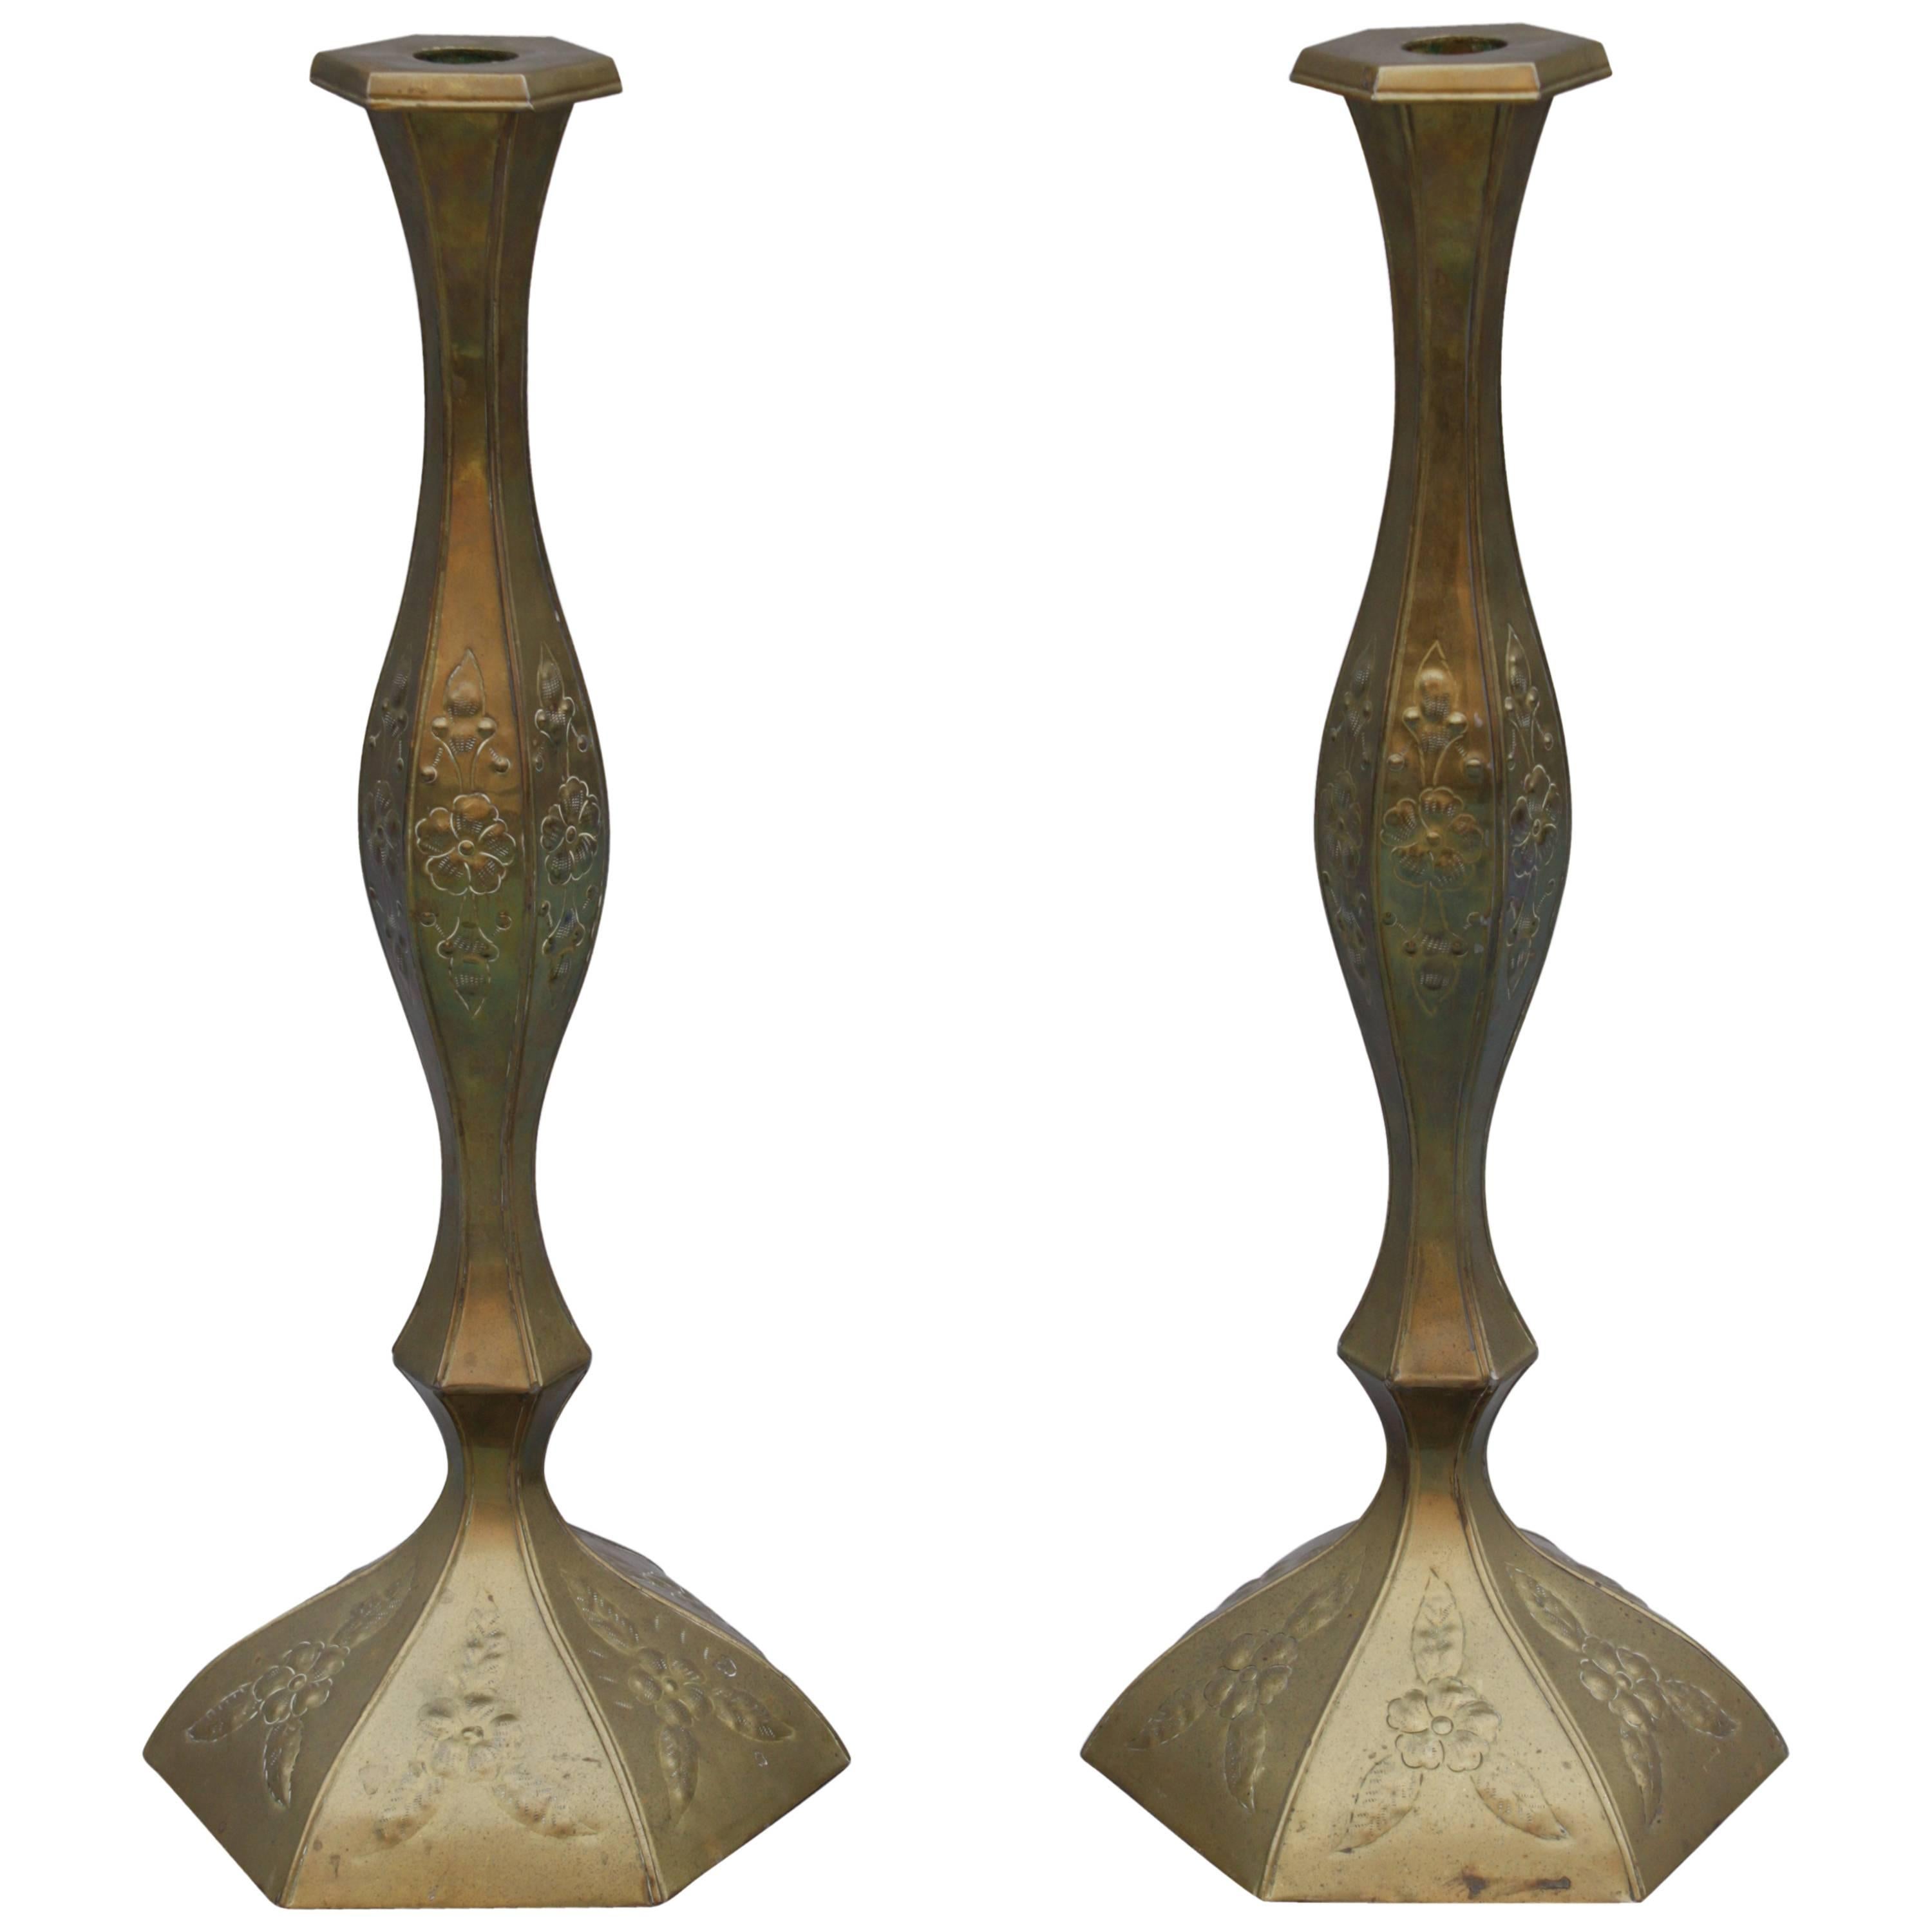 Large Pair of Antique Brass Candlesticks